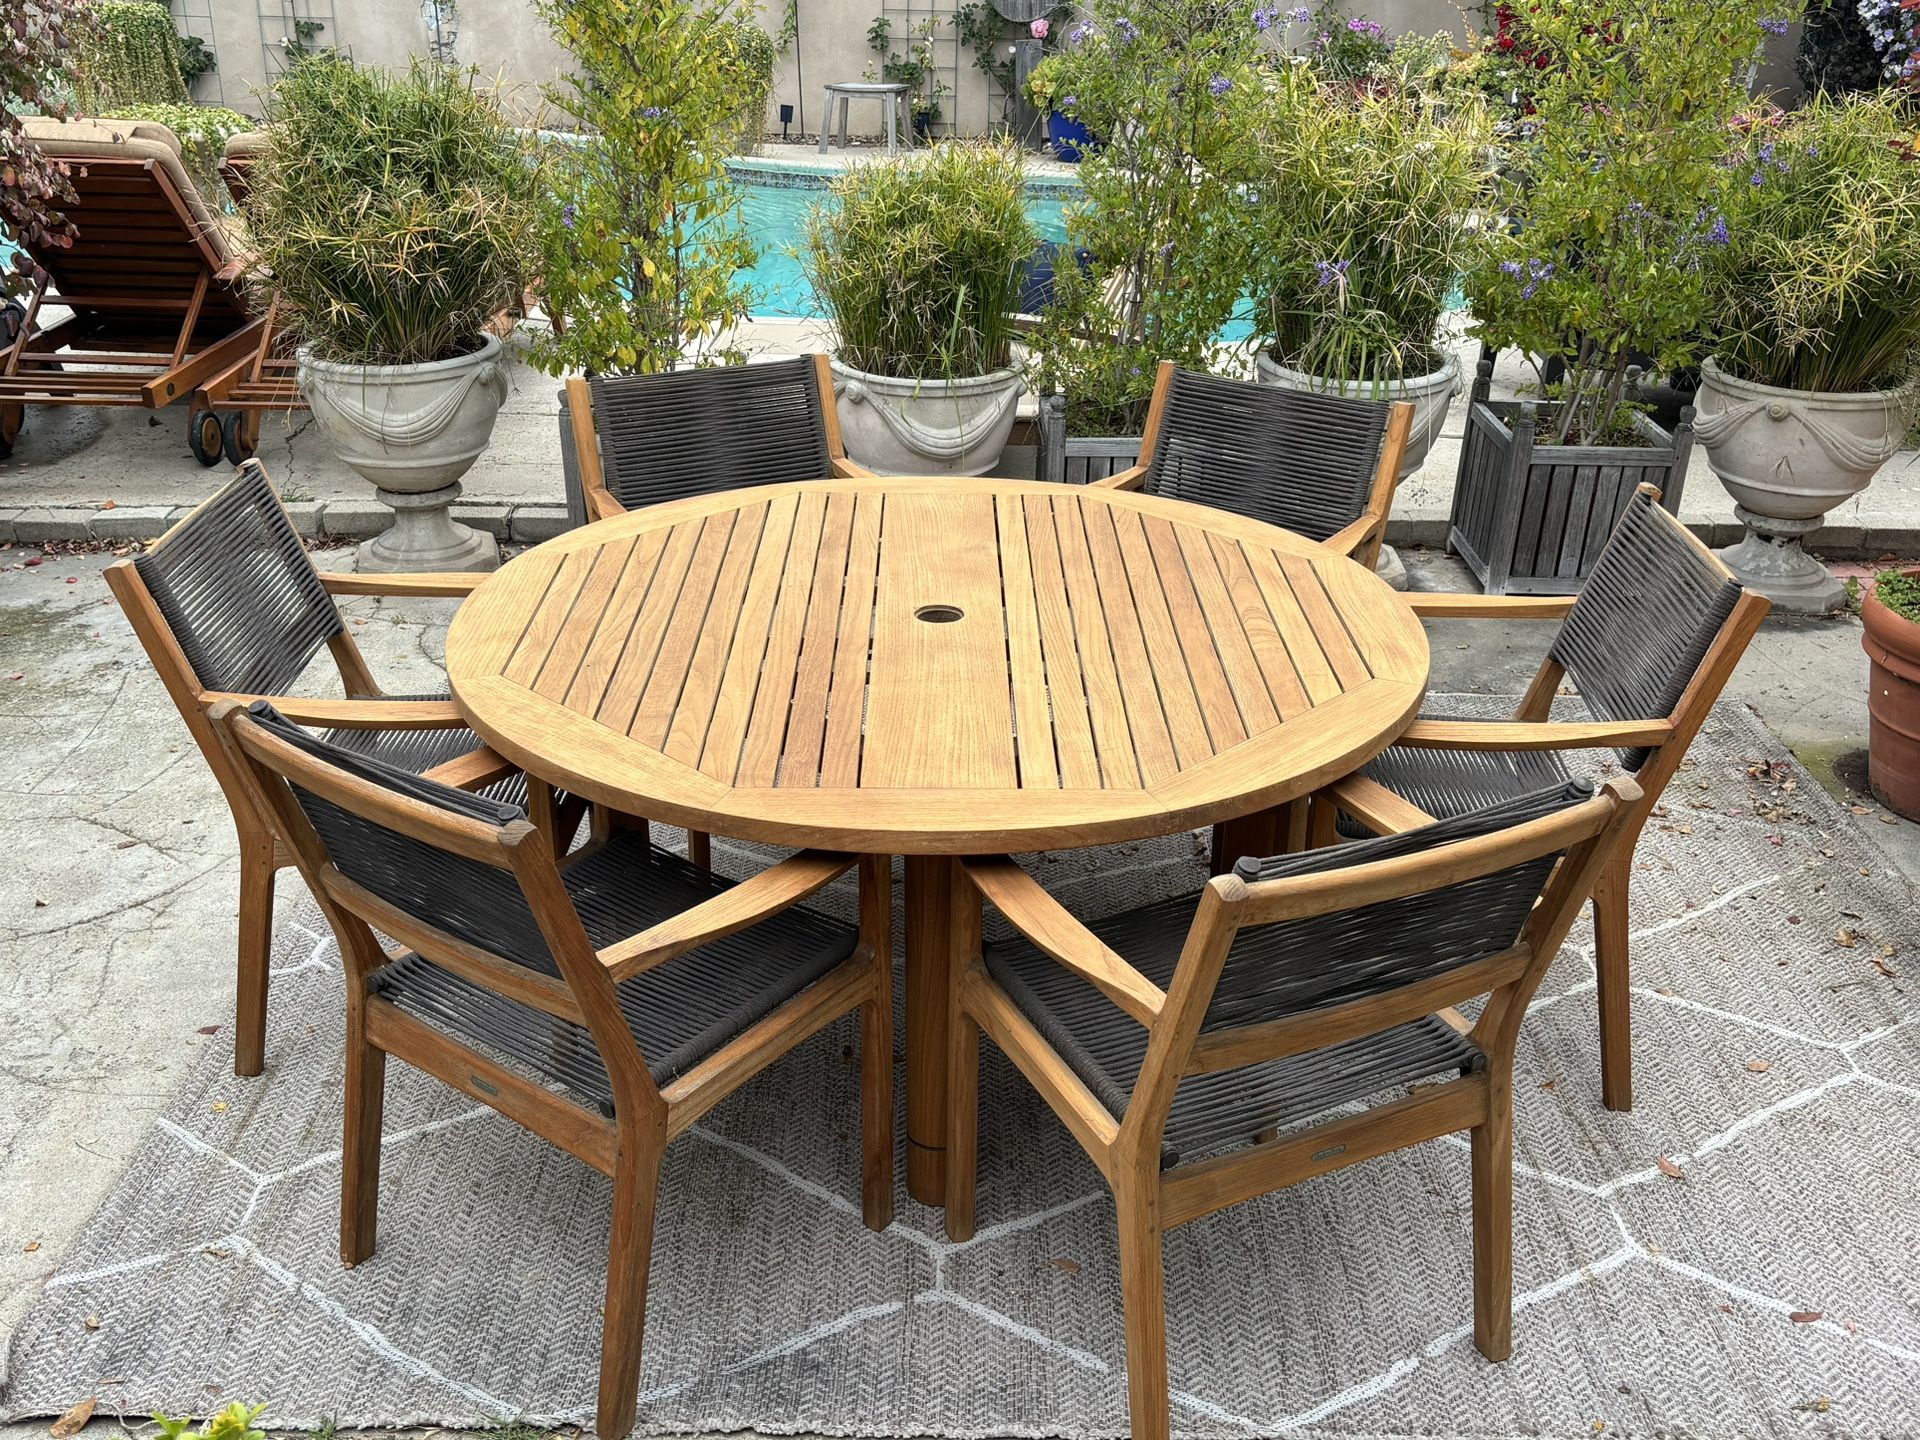 Barlow Tyrie Teak Dining Table Set, 5’ Table and 6 Chairs 